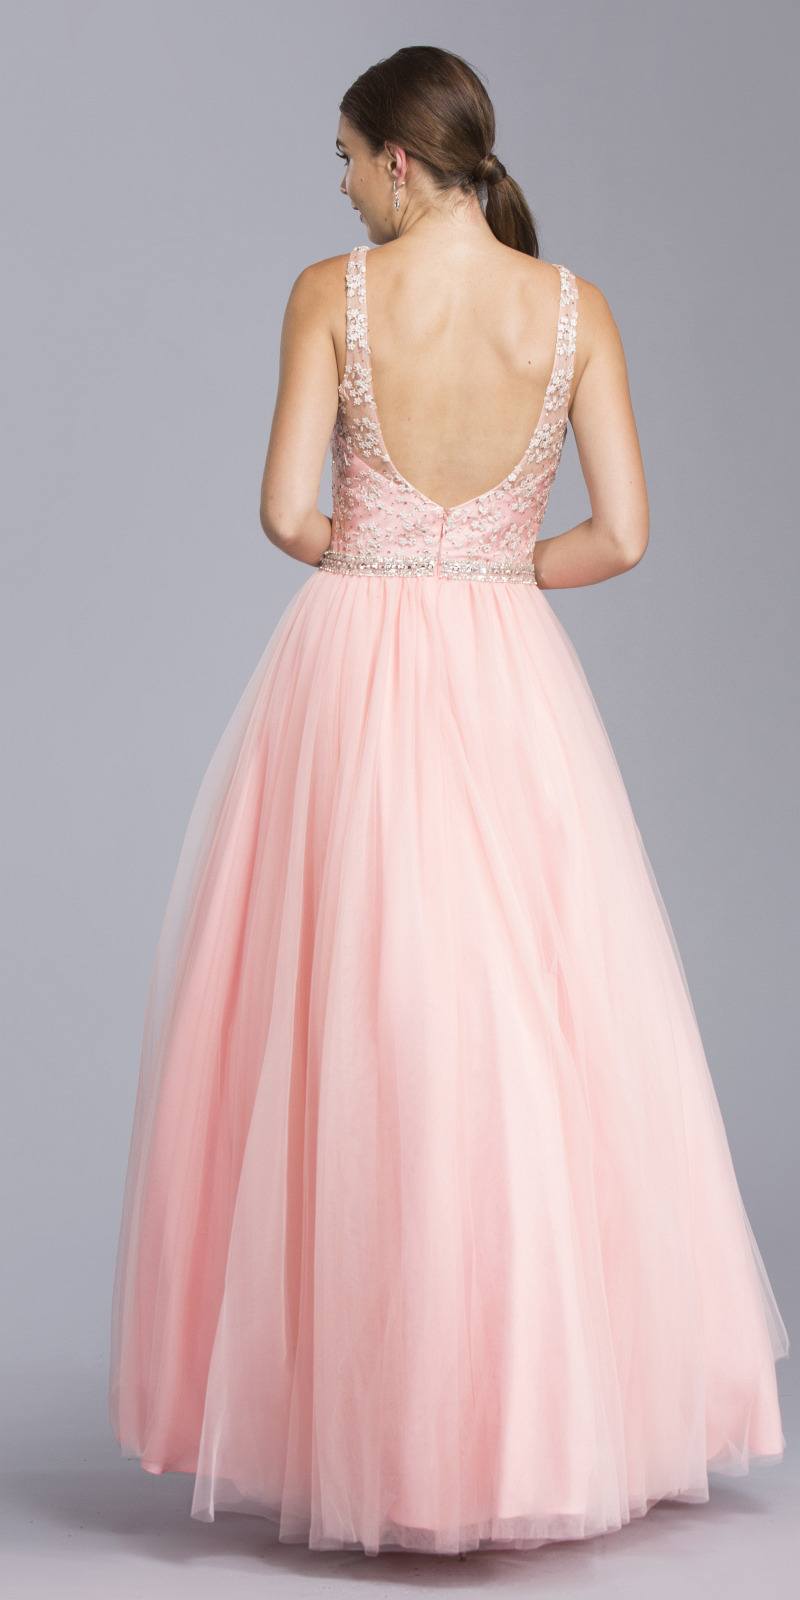 V-Neck Embroidered Quinceanera Dress Open Back